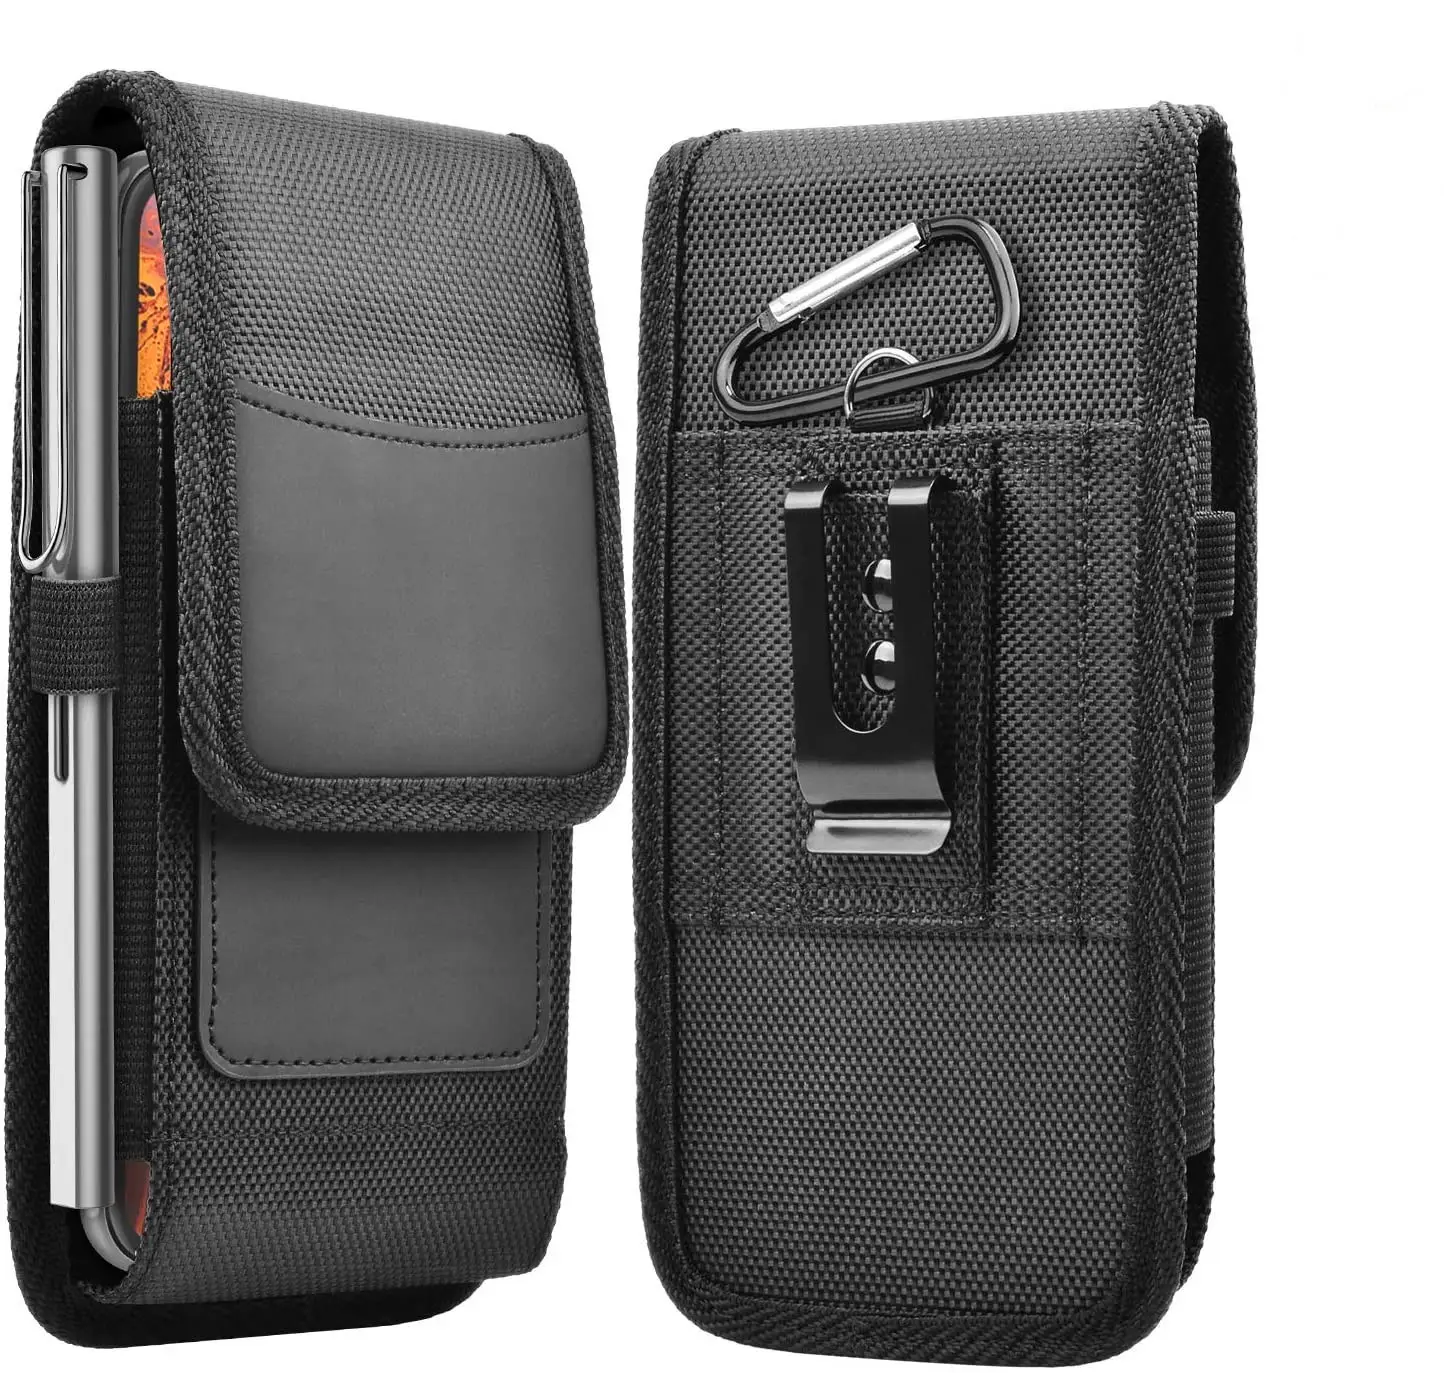 Holster insert card Oxford nylon fabric wear belt mobile phone Fanny pack is suitable for iPhone 13 Max 11PRO